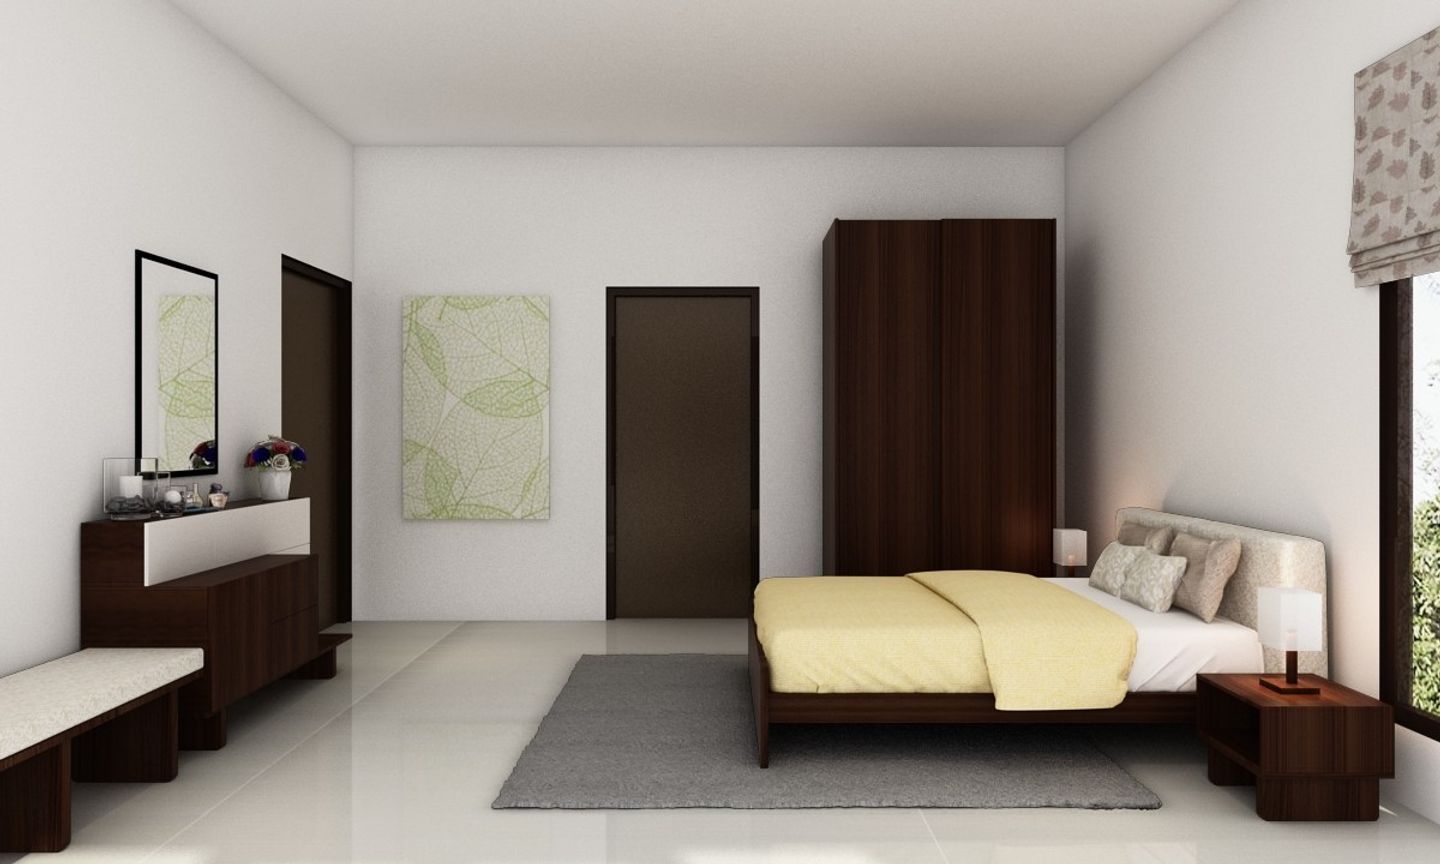 Modern Guest Room Design In White And Brown